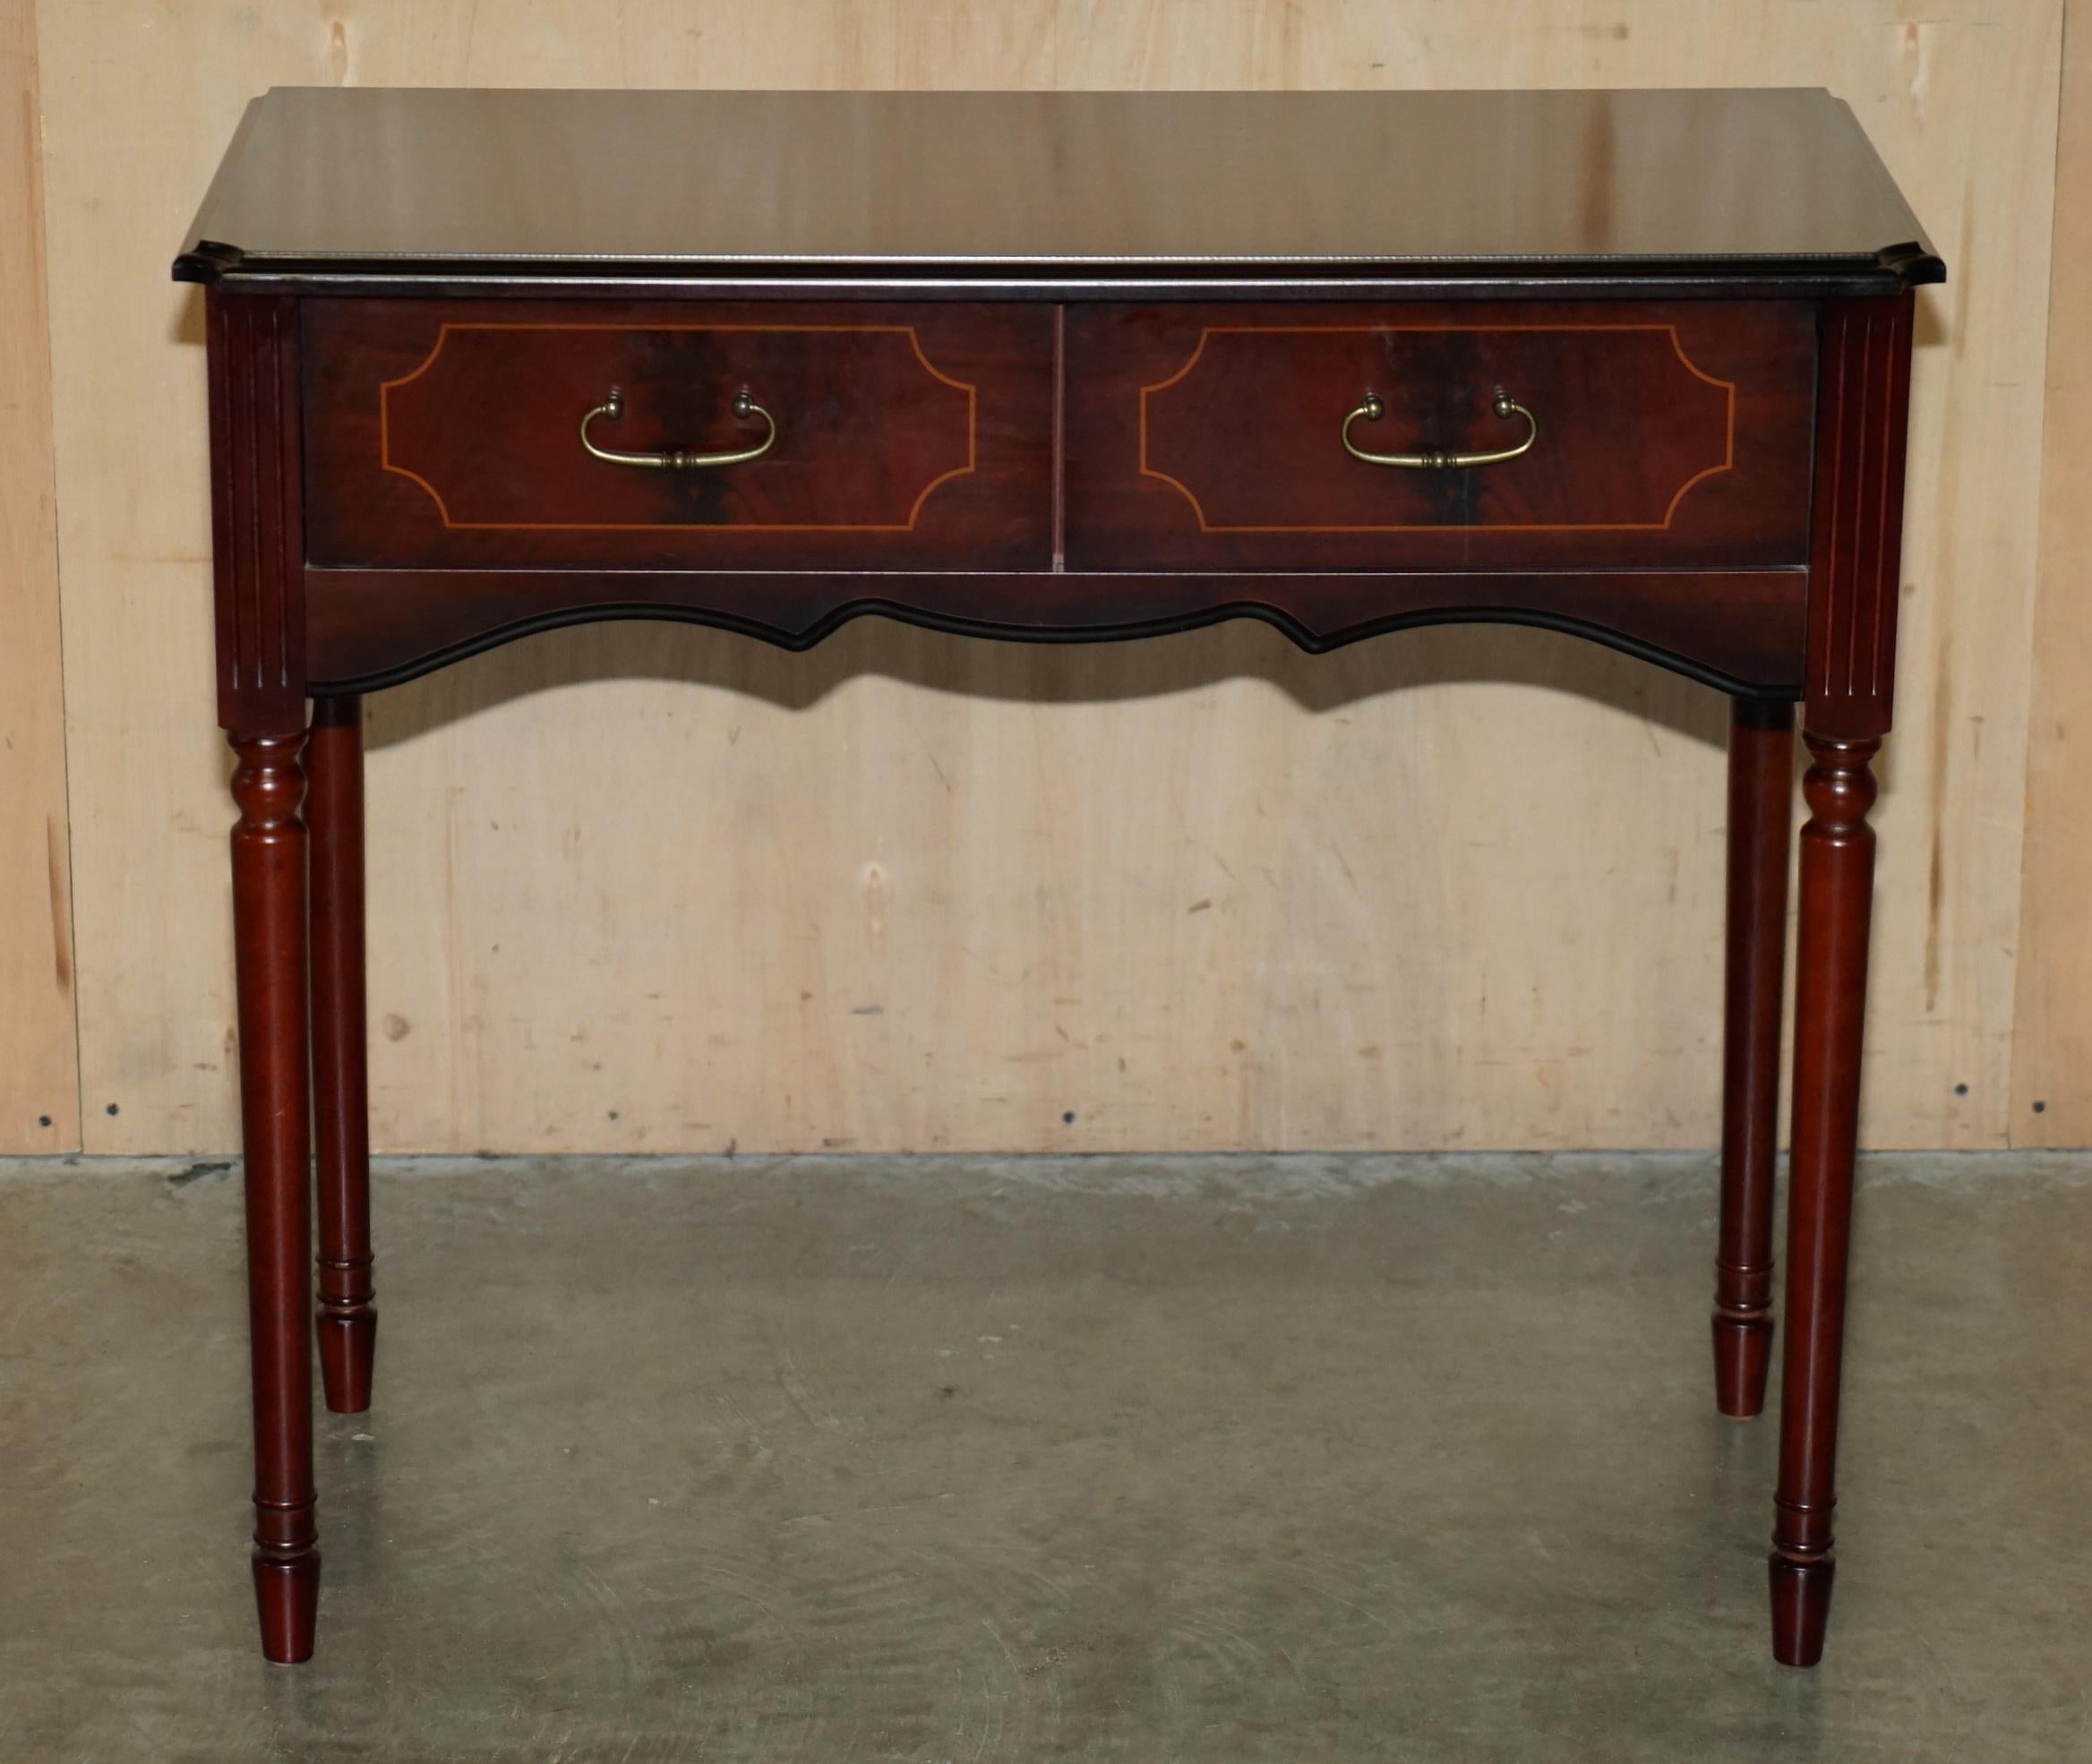 Royal House Antiques

Royal House Antiques is delighted to offer for sale this nice small two drawer side console table 

Please note the delivery fee listed is just a guide, it covers within the M25 only for the UK and local Europe only for